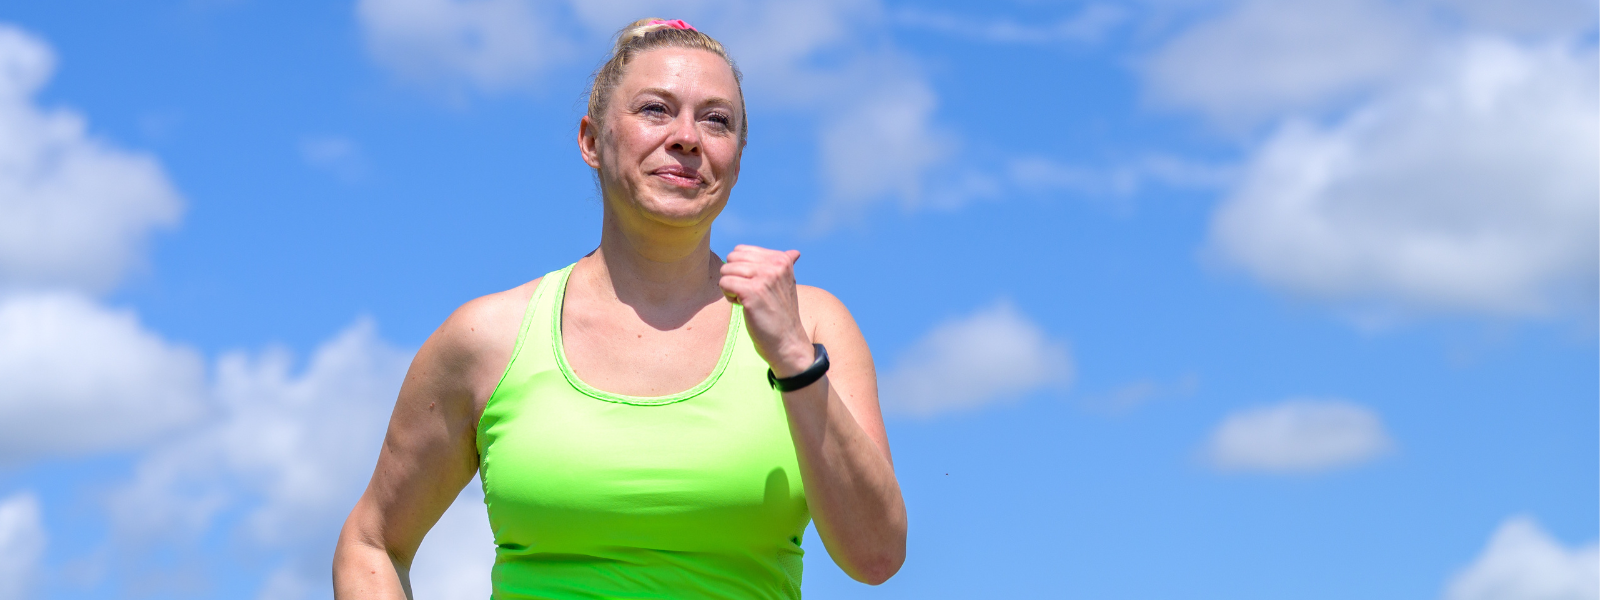 exercise is a great perimenopause medicine